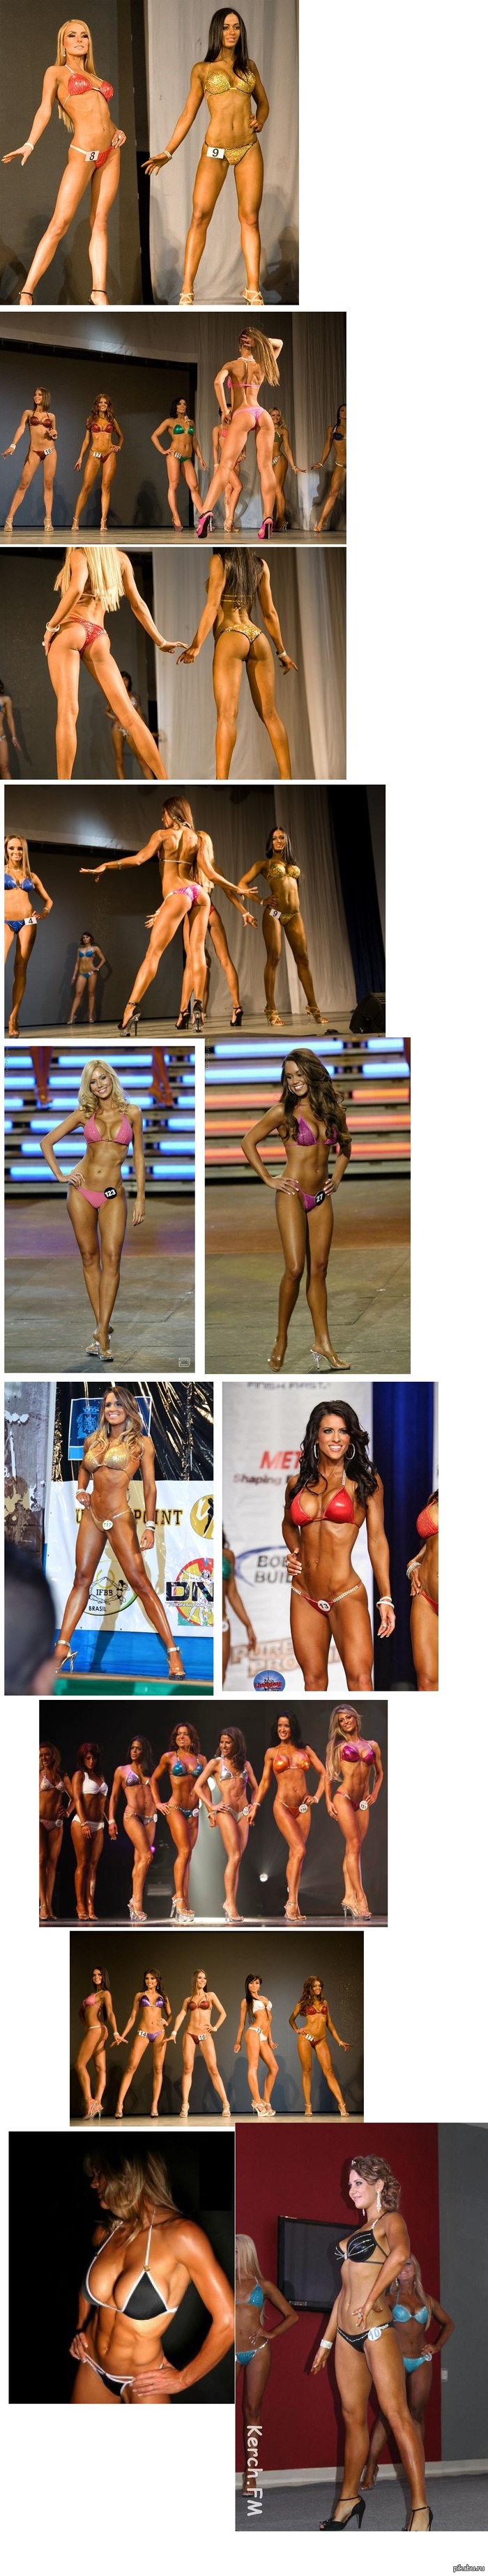 Favorite beauty pageant - NSFW, Competition, Girls, Sexuality